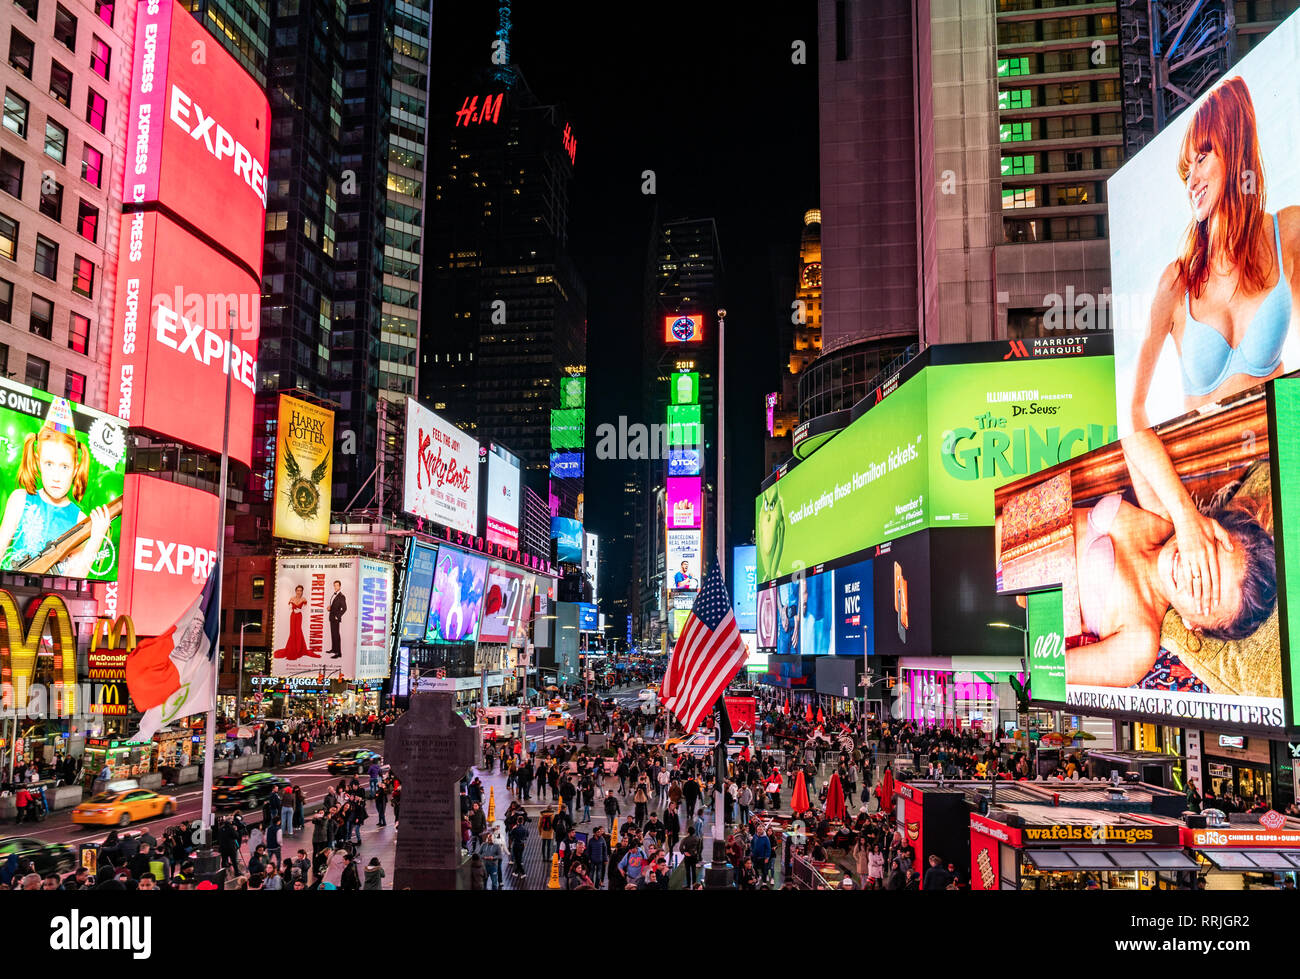 The chaos and lights of New York City's Times Square, New York, United States of America, North America Stock Photo